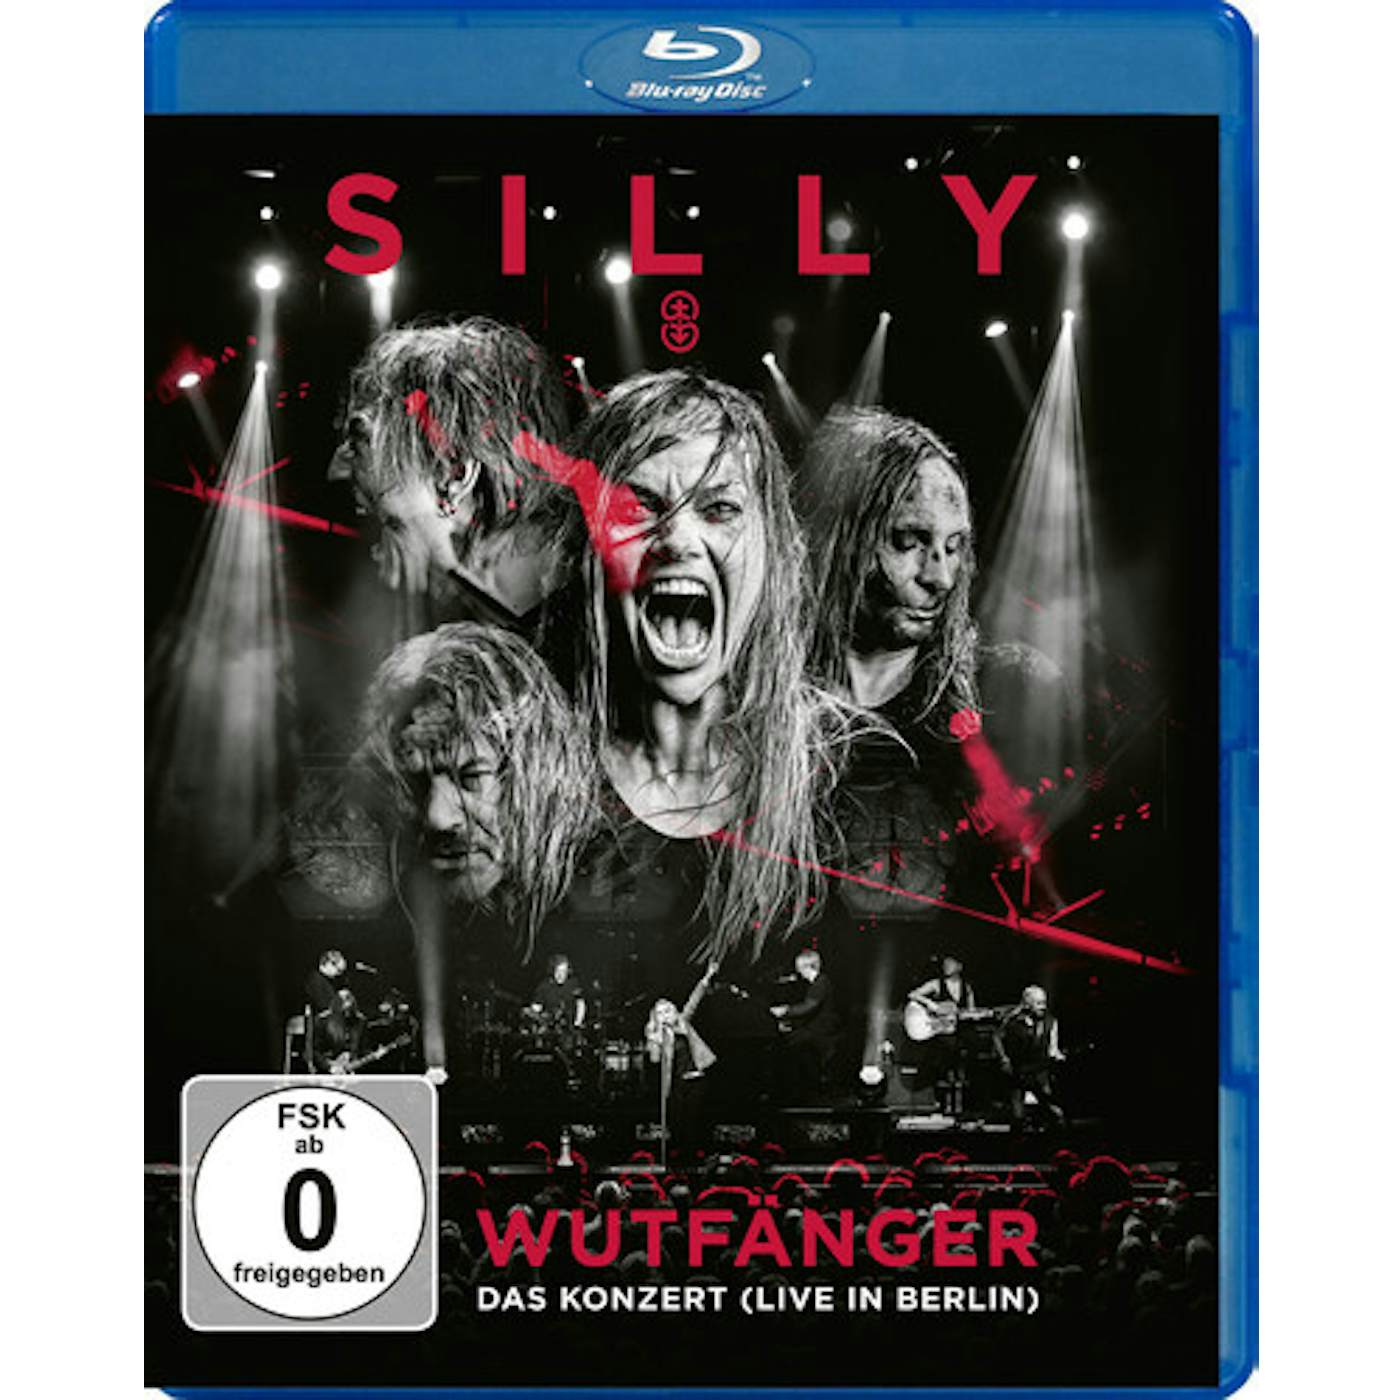 Silly WUTFANGER: THE CONCERT Blu-ray